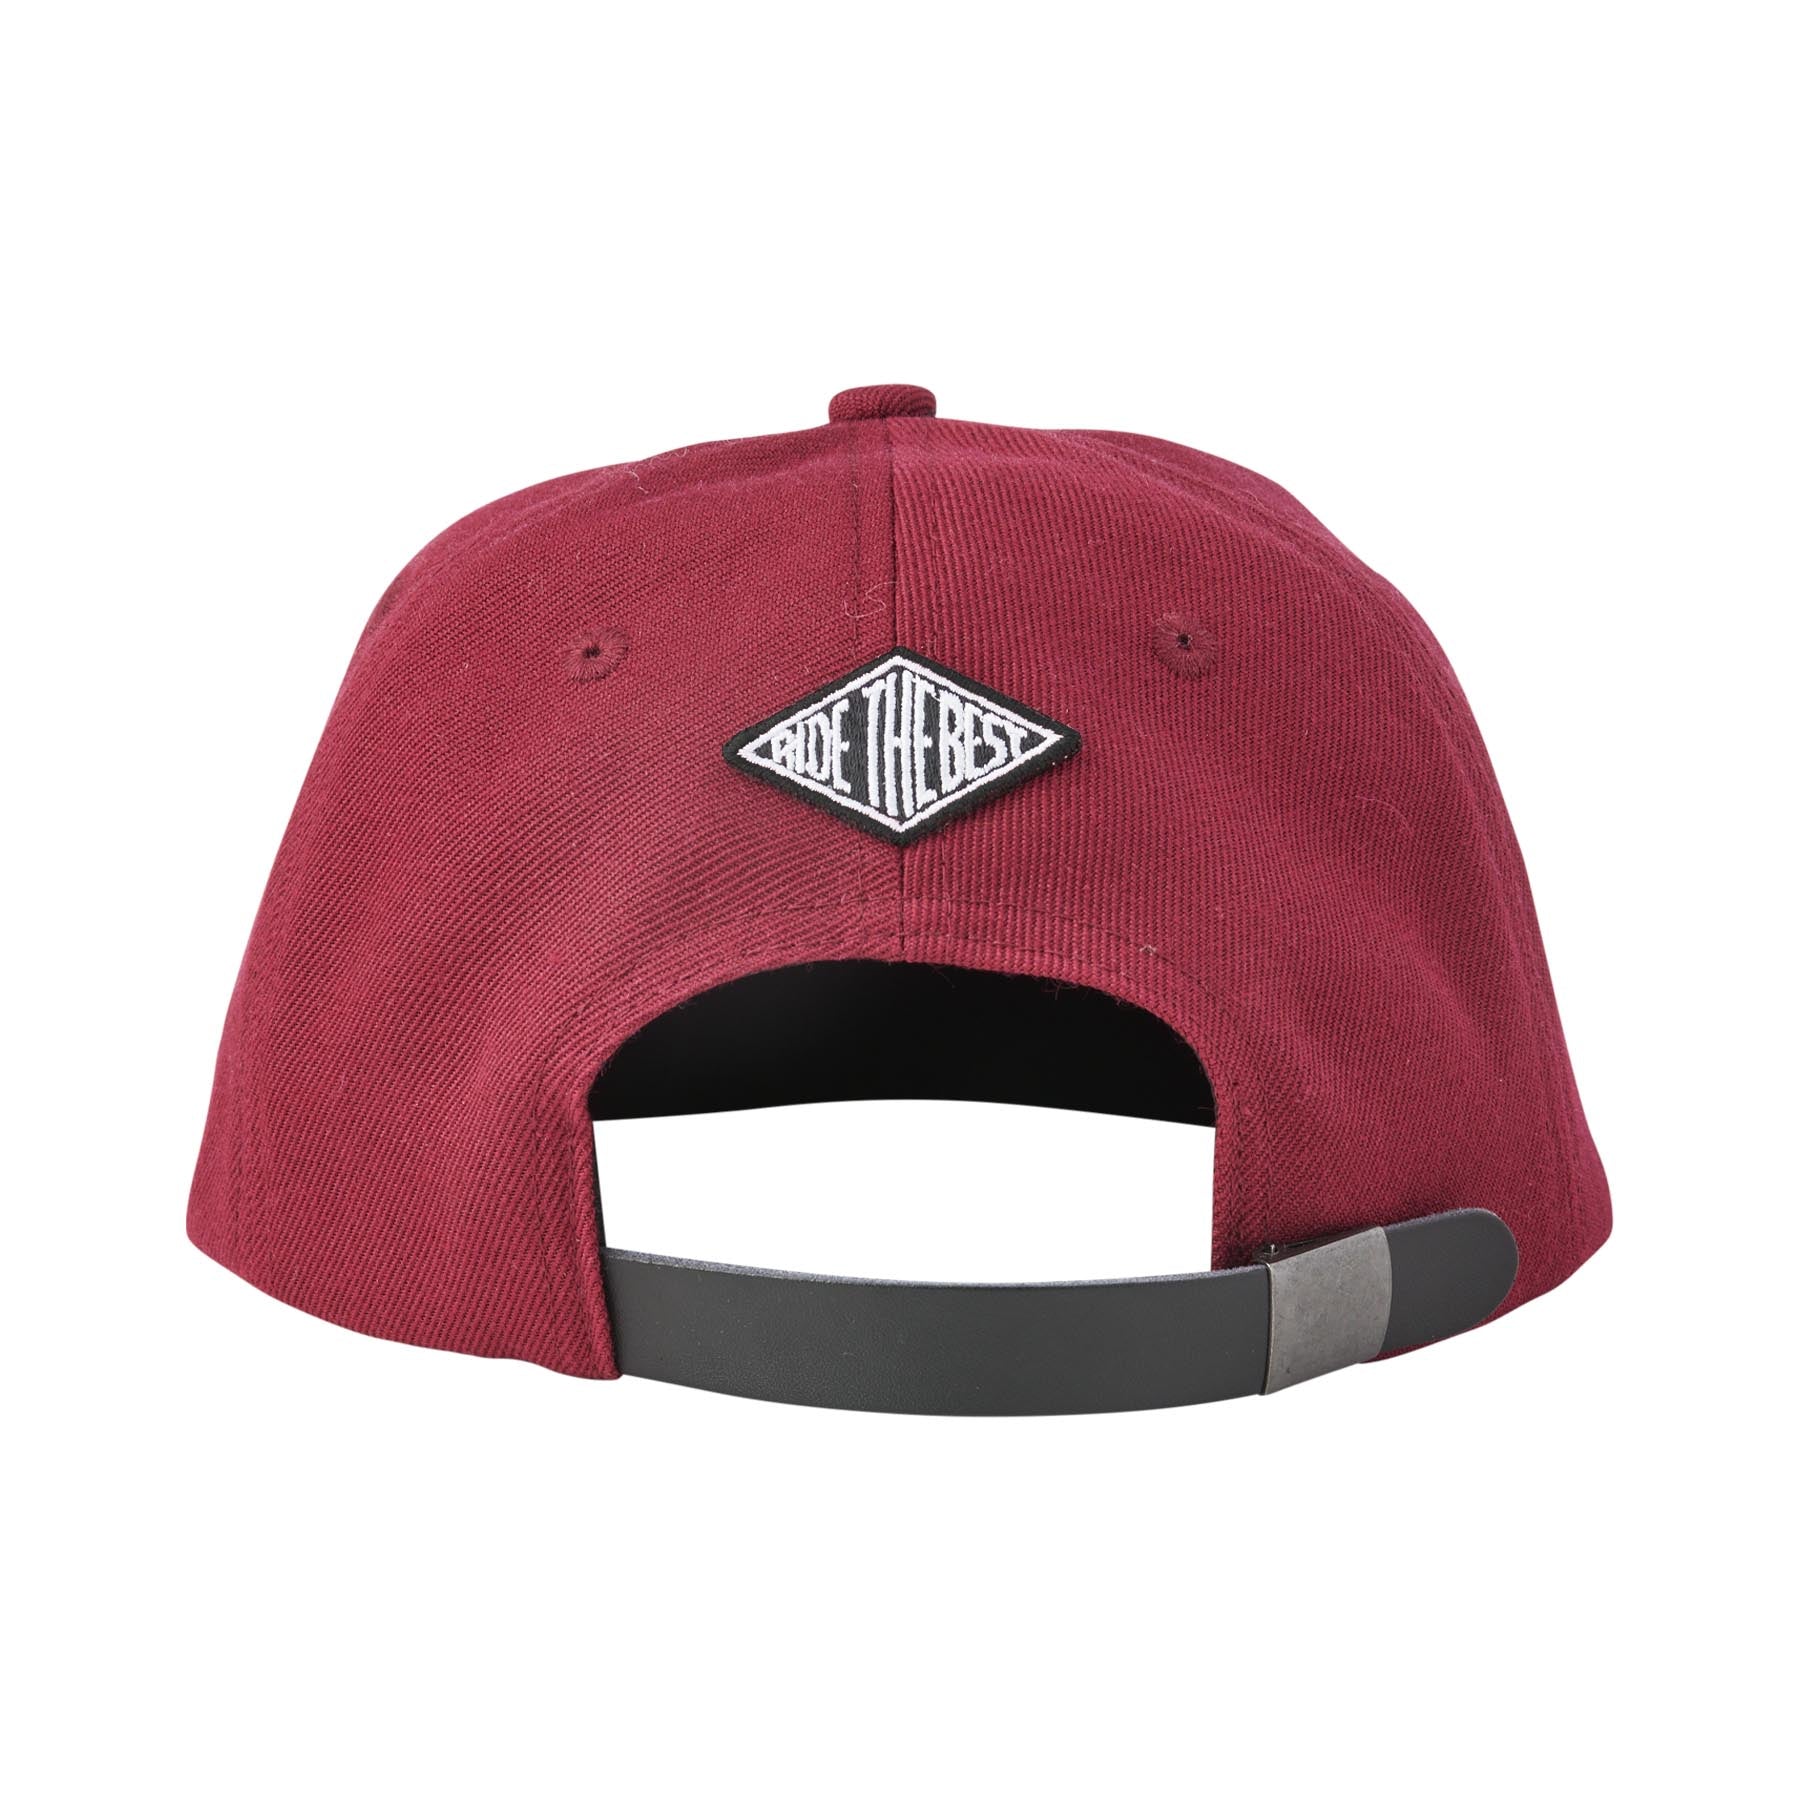 Independent Brigade Strapback Unstructured Mid Hat Cardinal OS Unisex - Invisible Board Shop